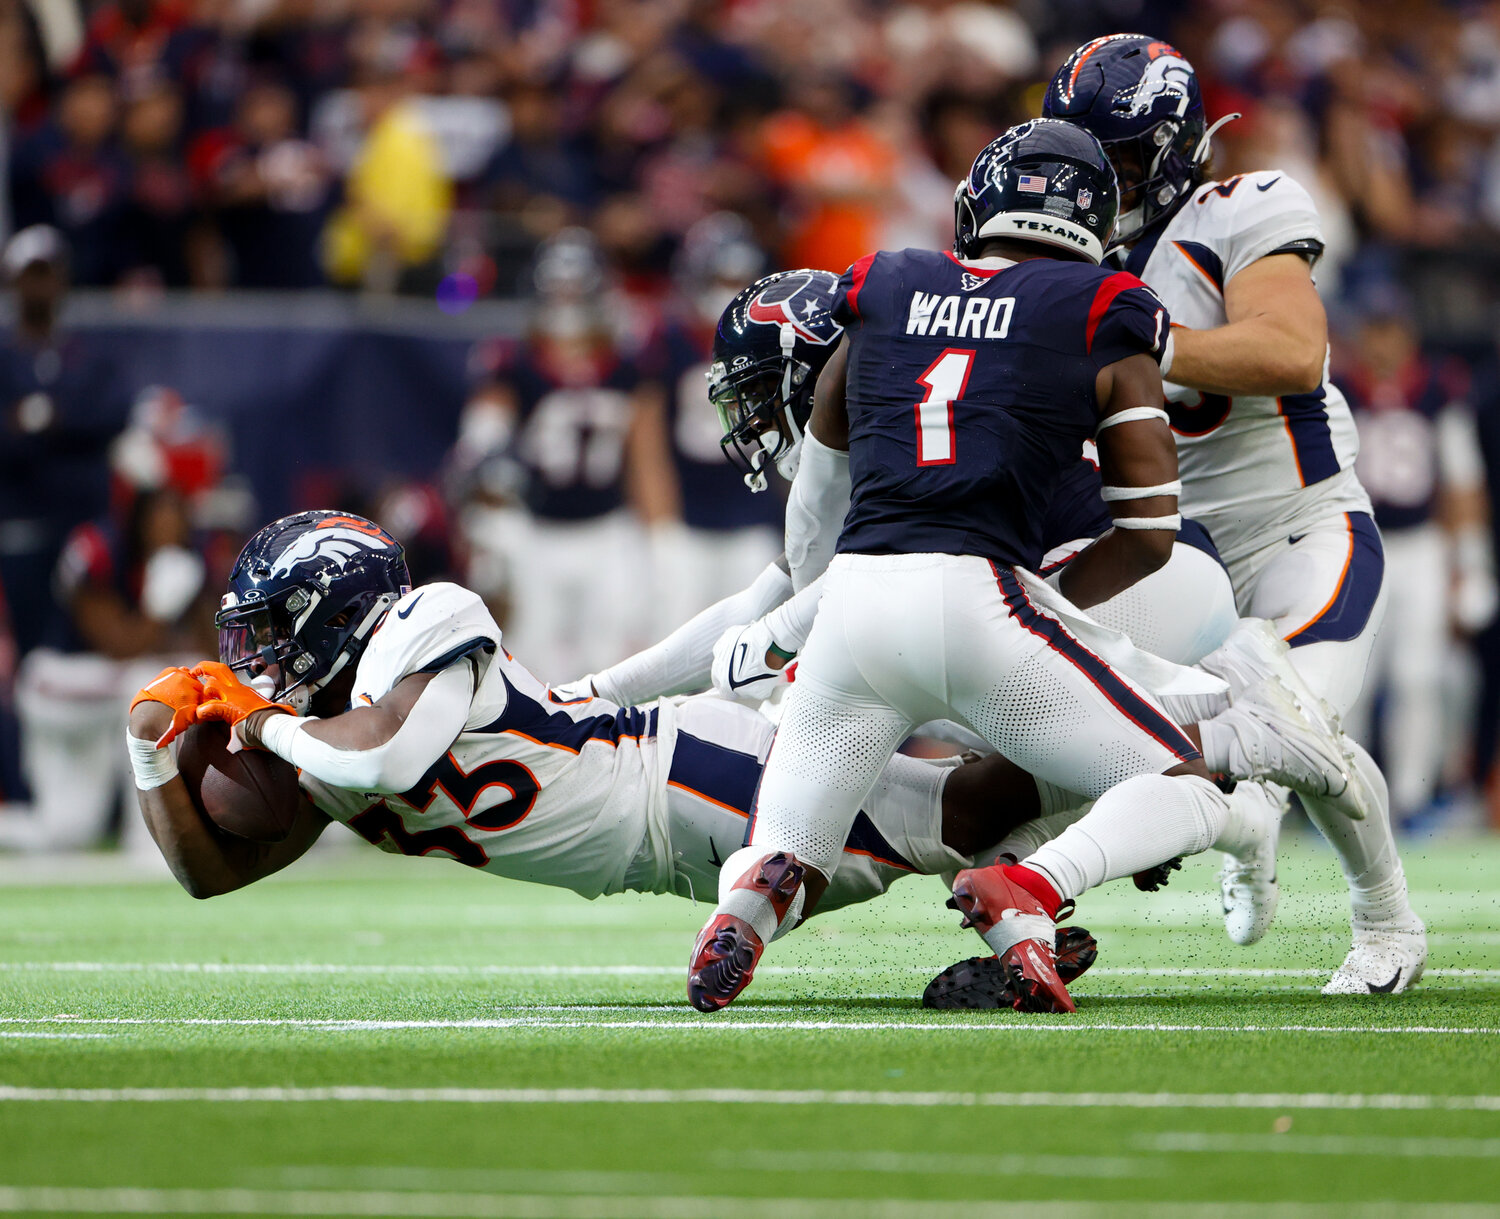 Broncos running back Javonte Williams (33) dives forward to pick up a first down during an NFL game between the Texans and the Broncos on December 3, 2023 in Houston. The Texans won, 22-17.